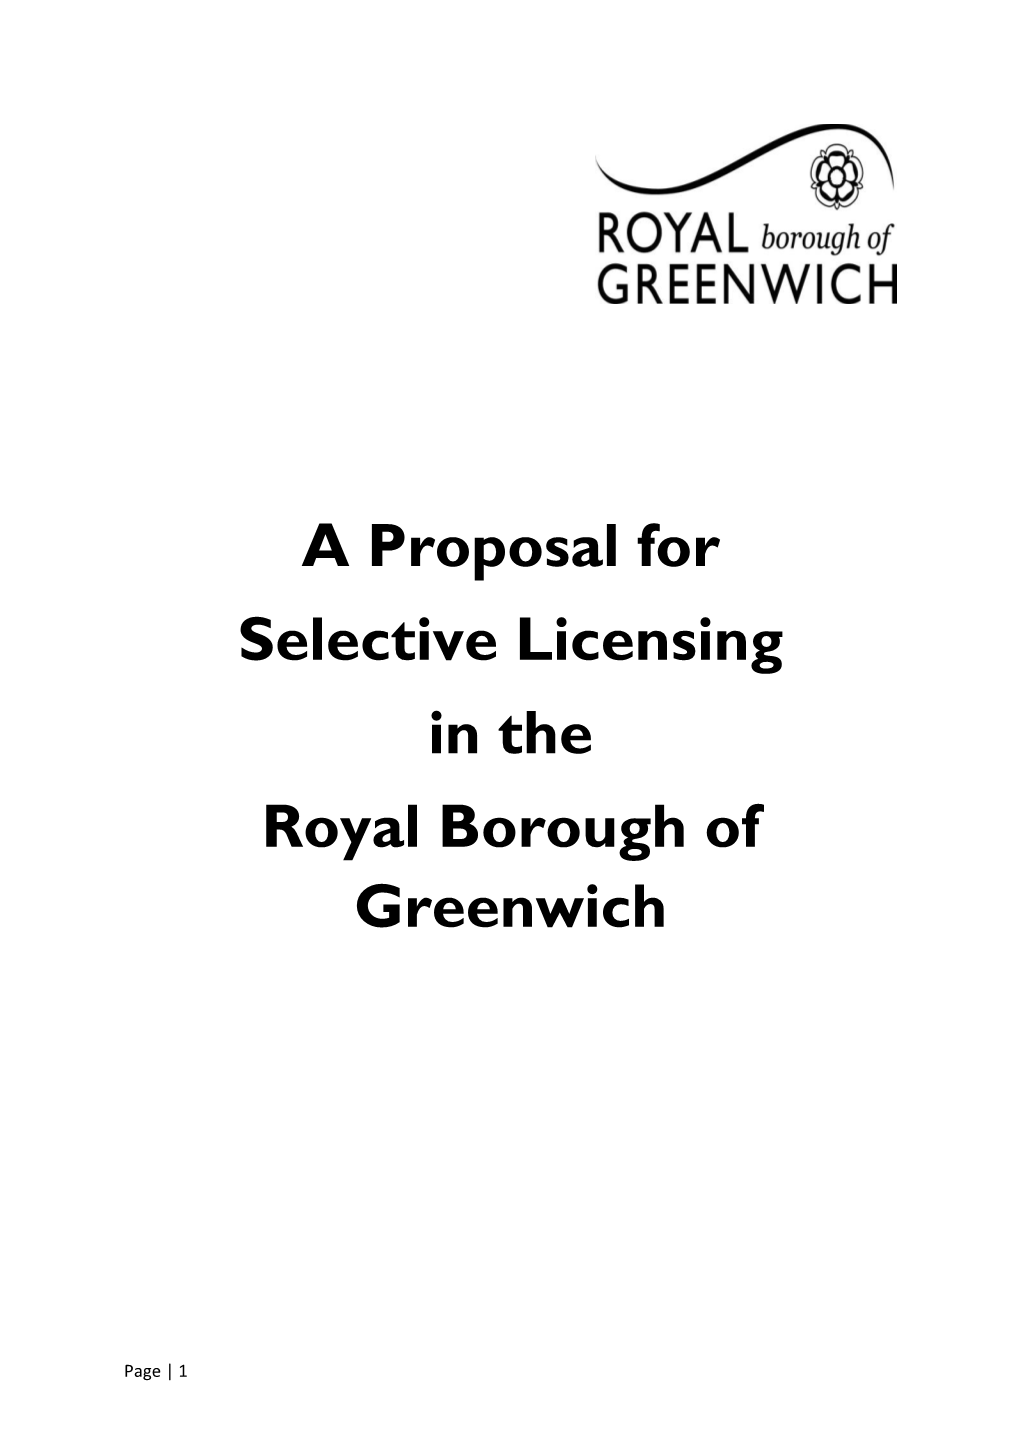 A Proposal for Selective Licensing in the Royal Borough of Greenwich